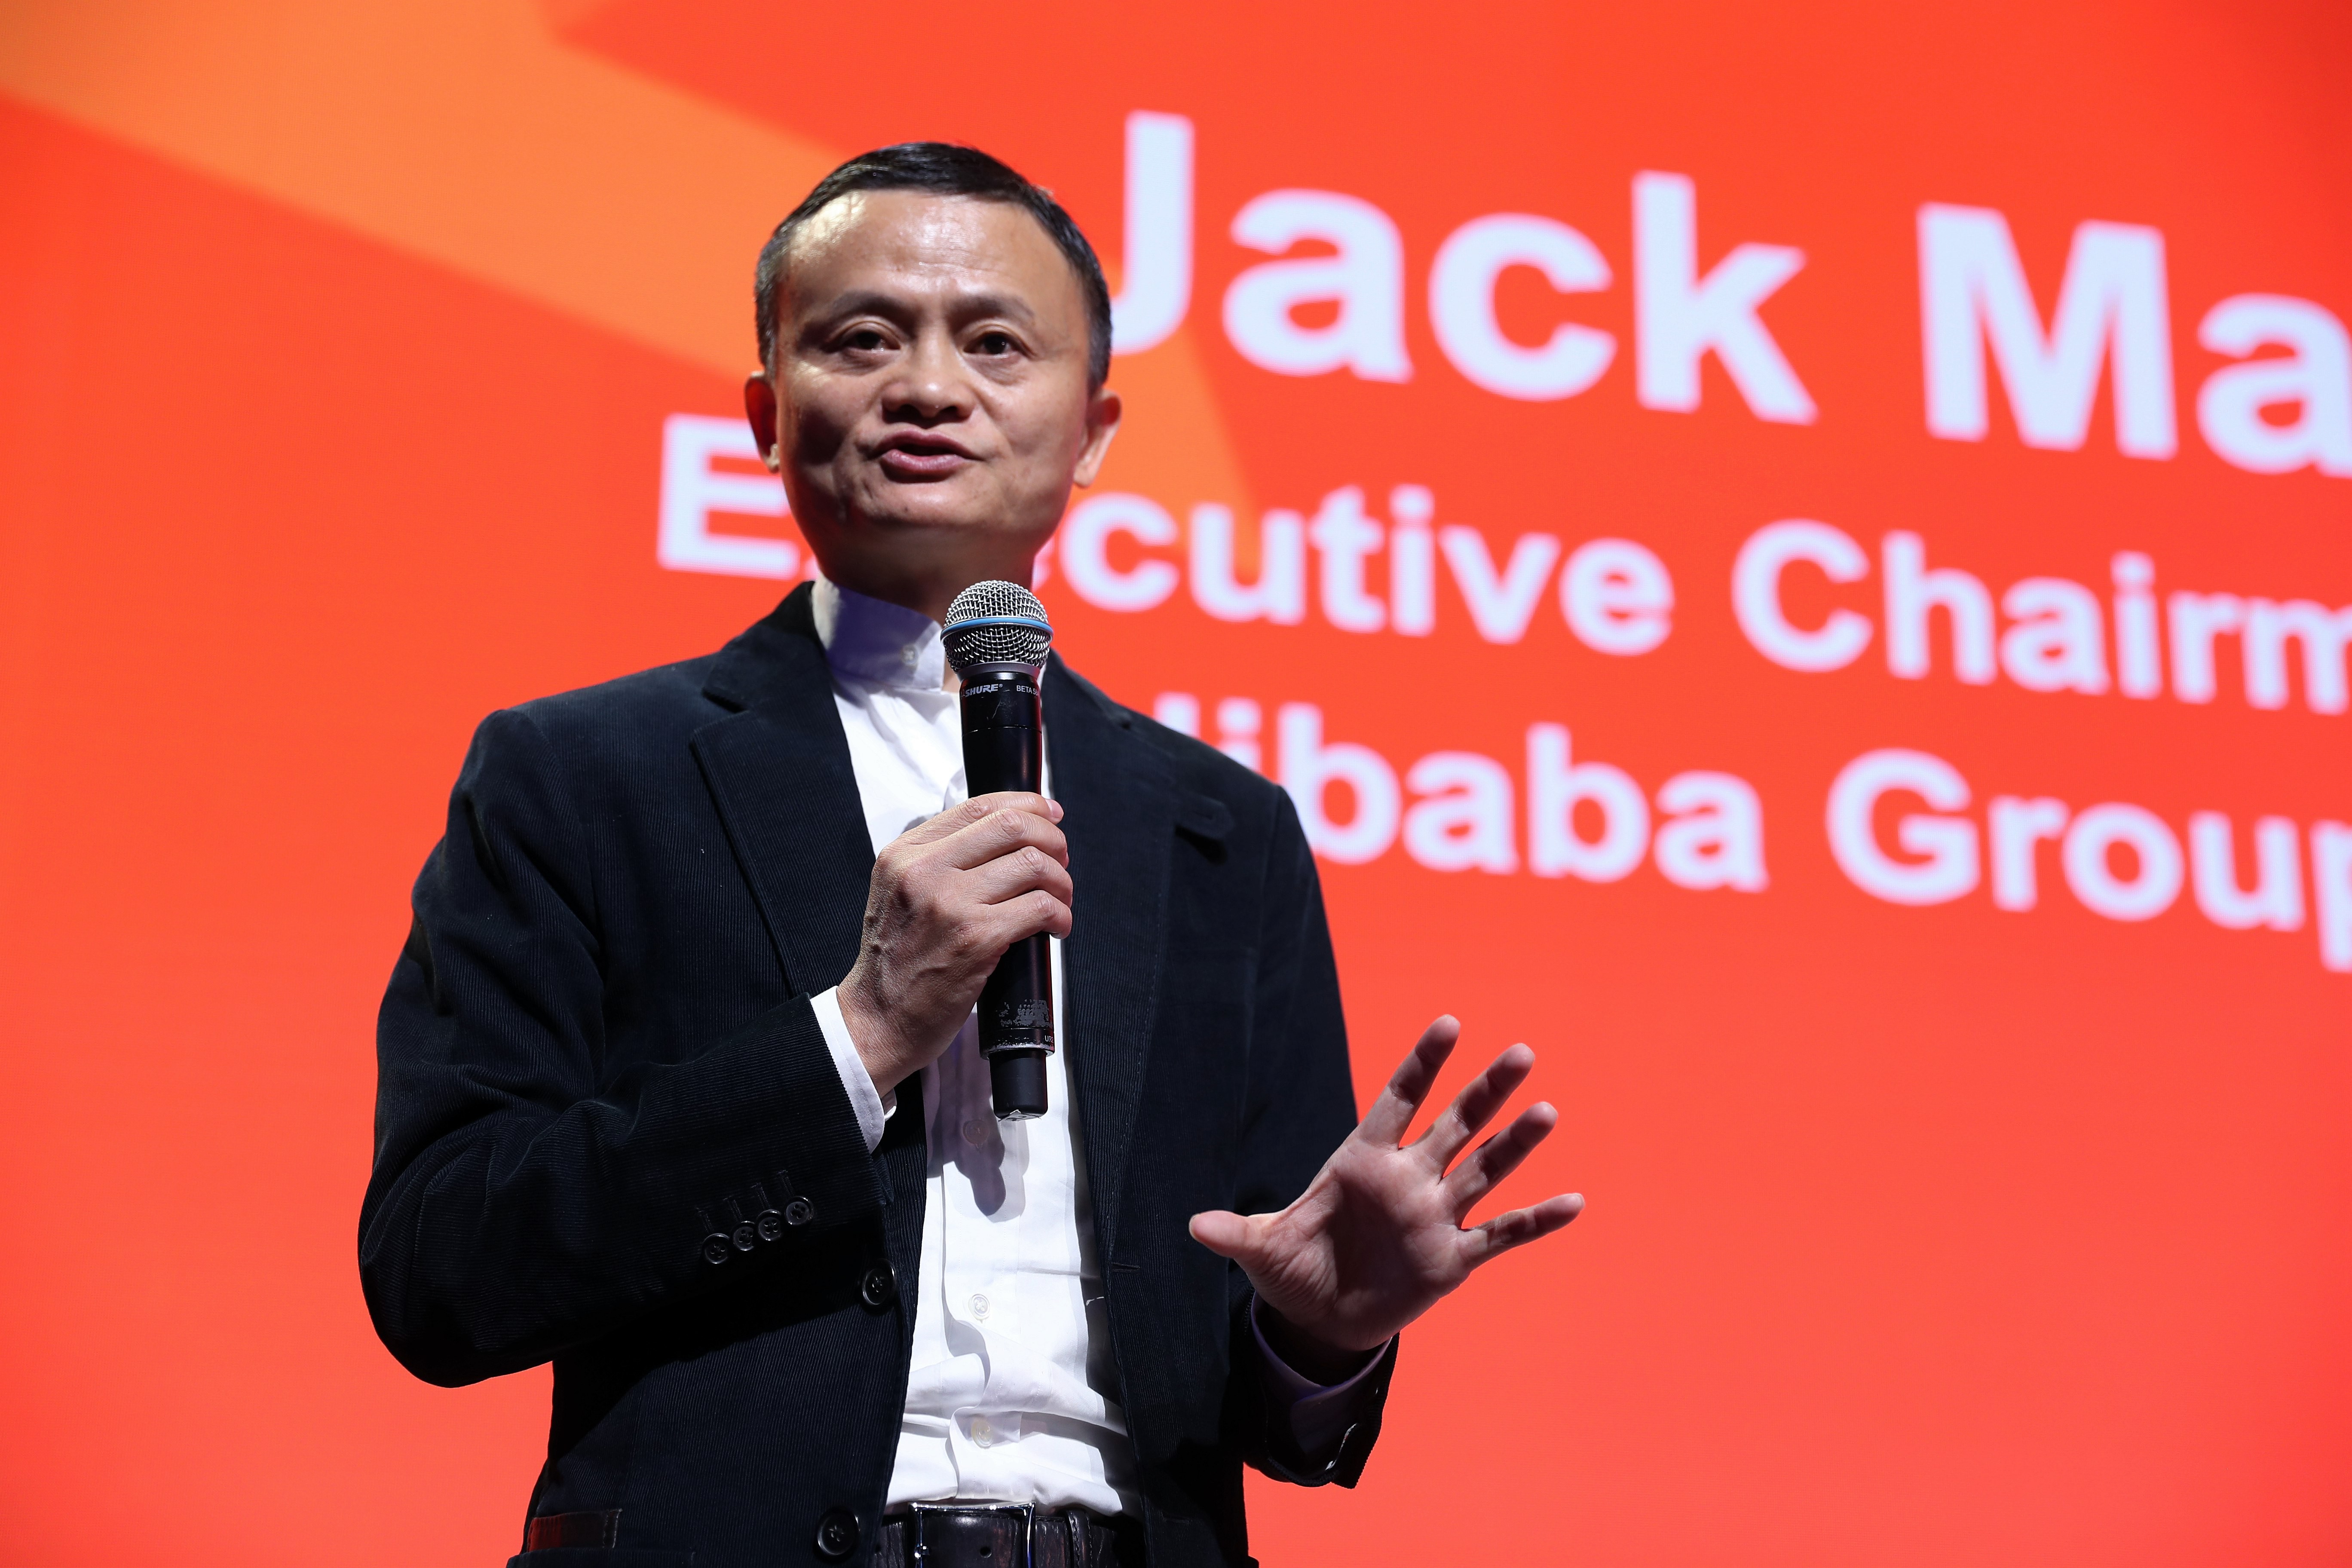 Jack Ma speaks during the welcoming ceremony at Alibaba’s Gateway '17 conference in Detroit in June 2017. Photo: Xinhua